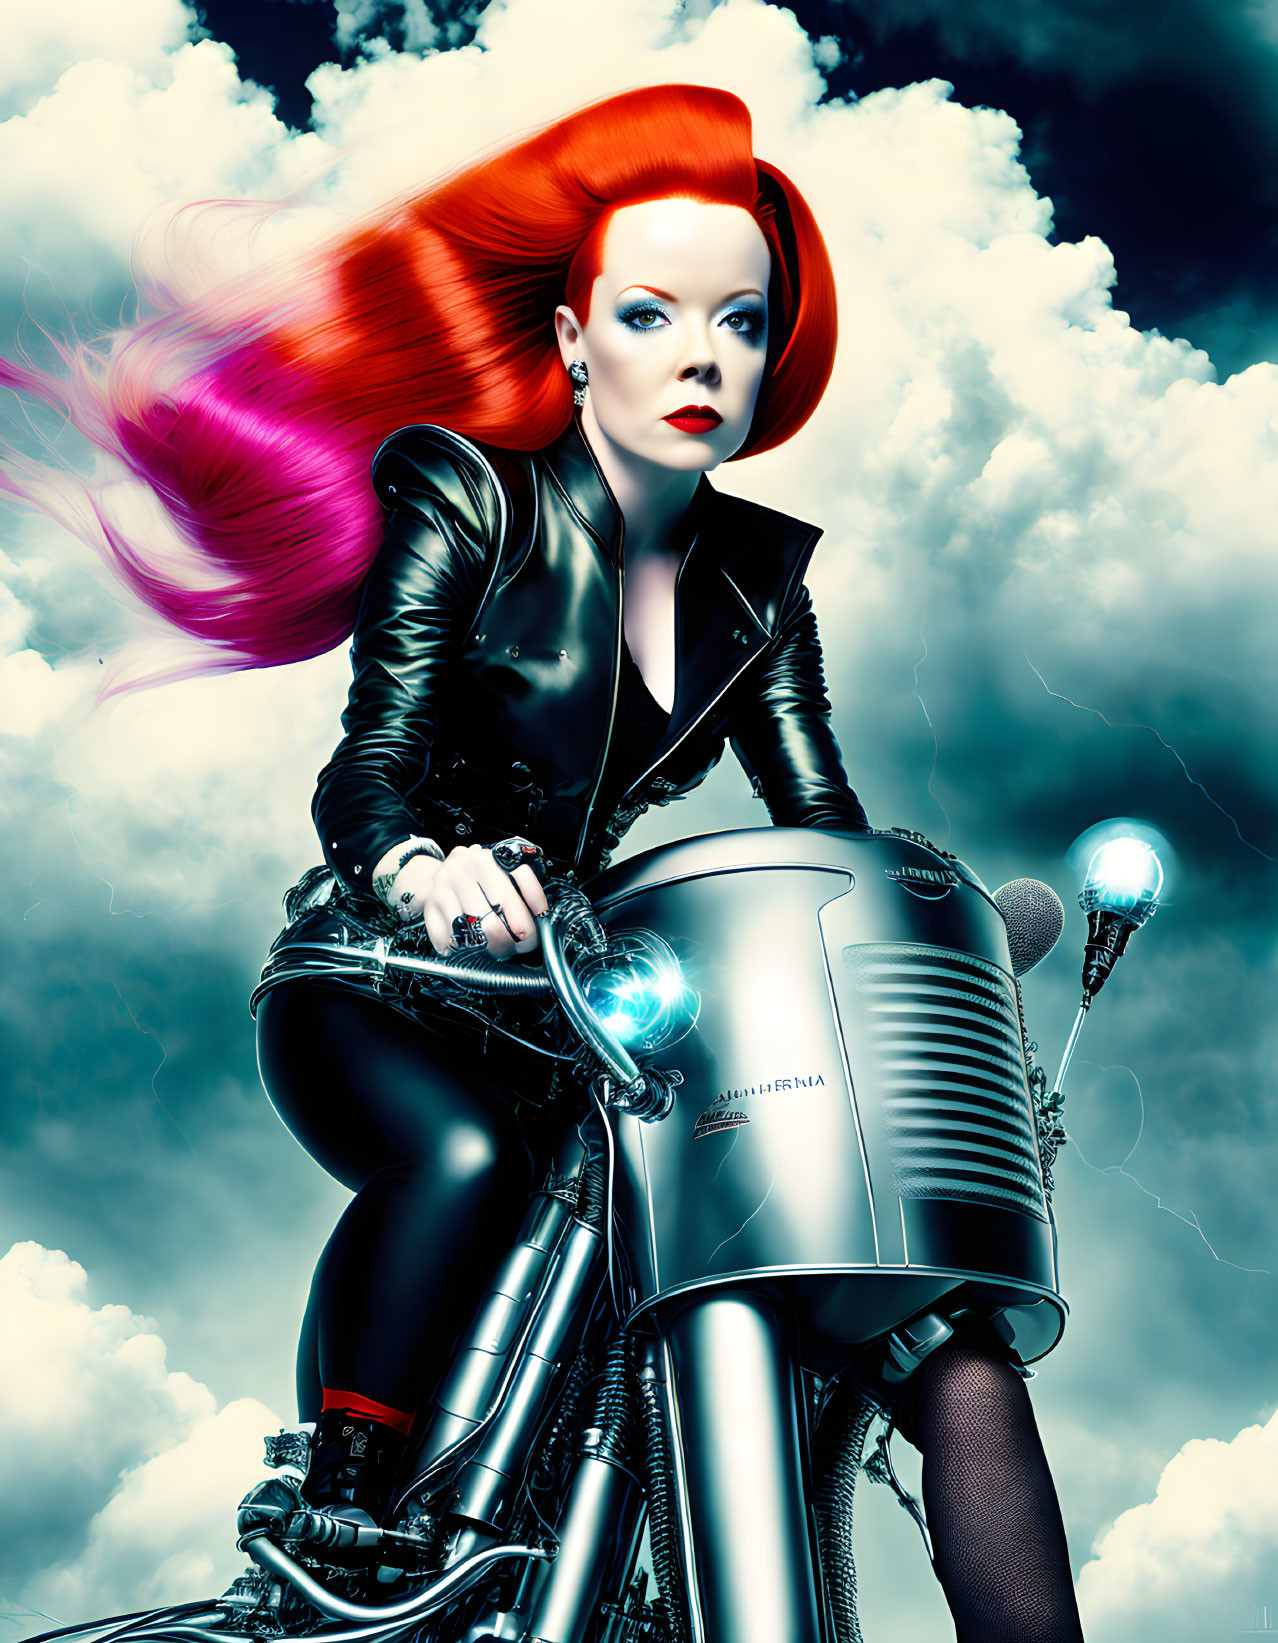 Red-haired woman in black leather outfit on motorcycle under dramatic clouds